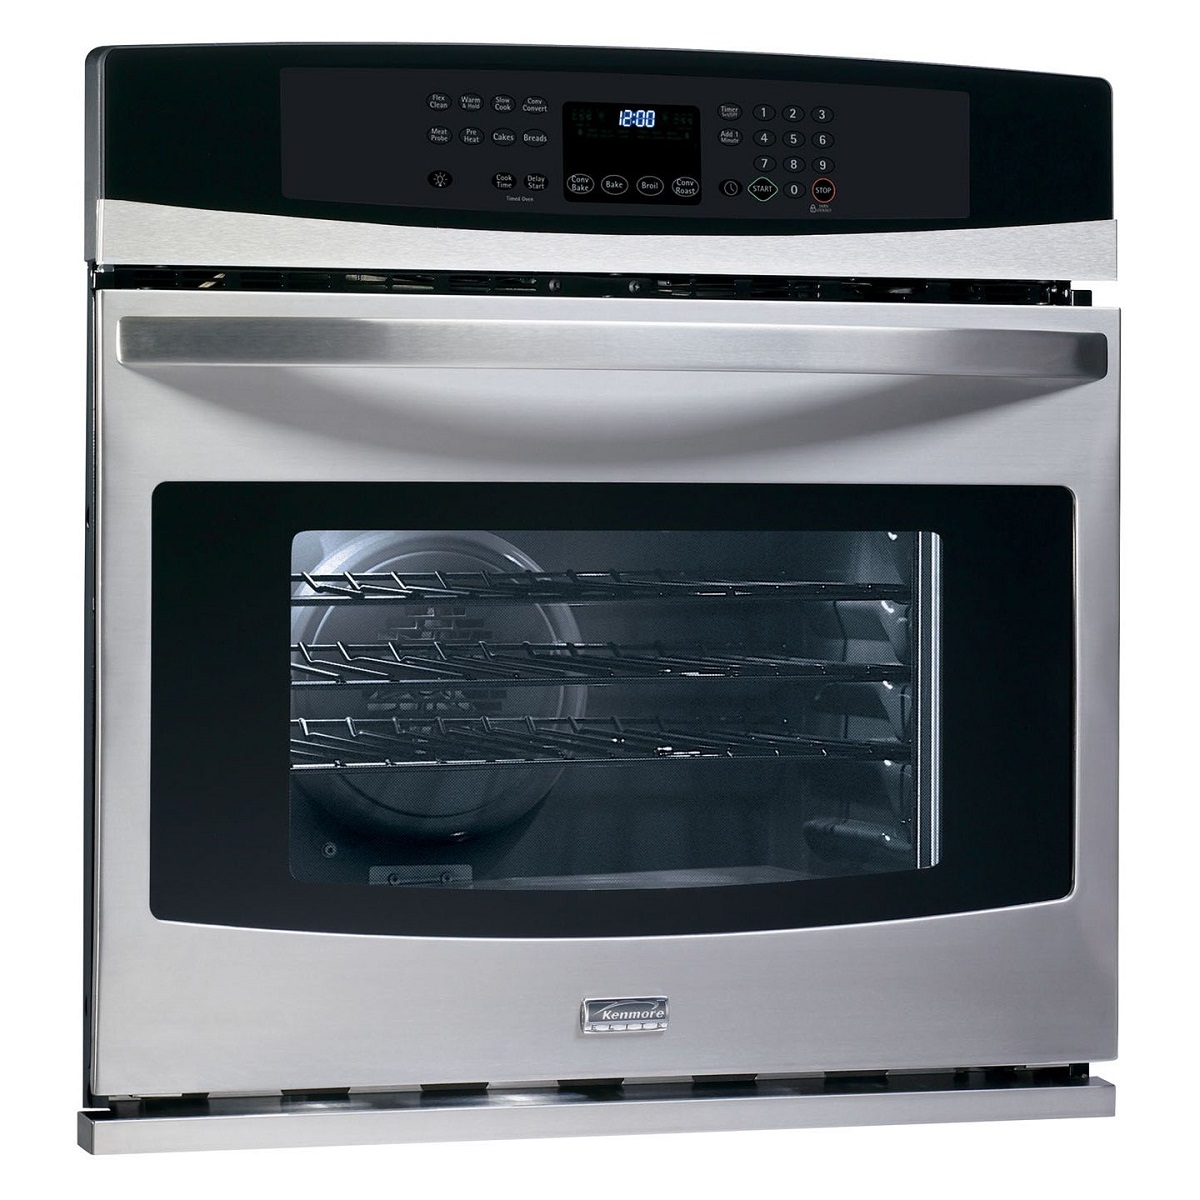 How your Oven Rack is Key to Tasty Perfection, Davies Appliance